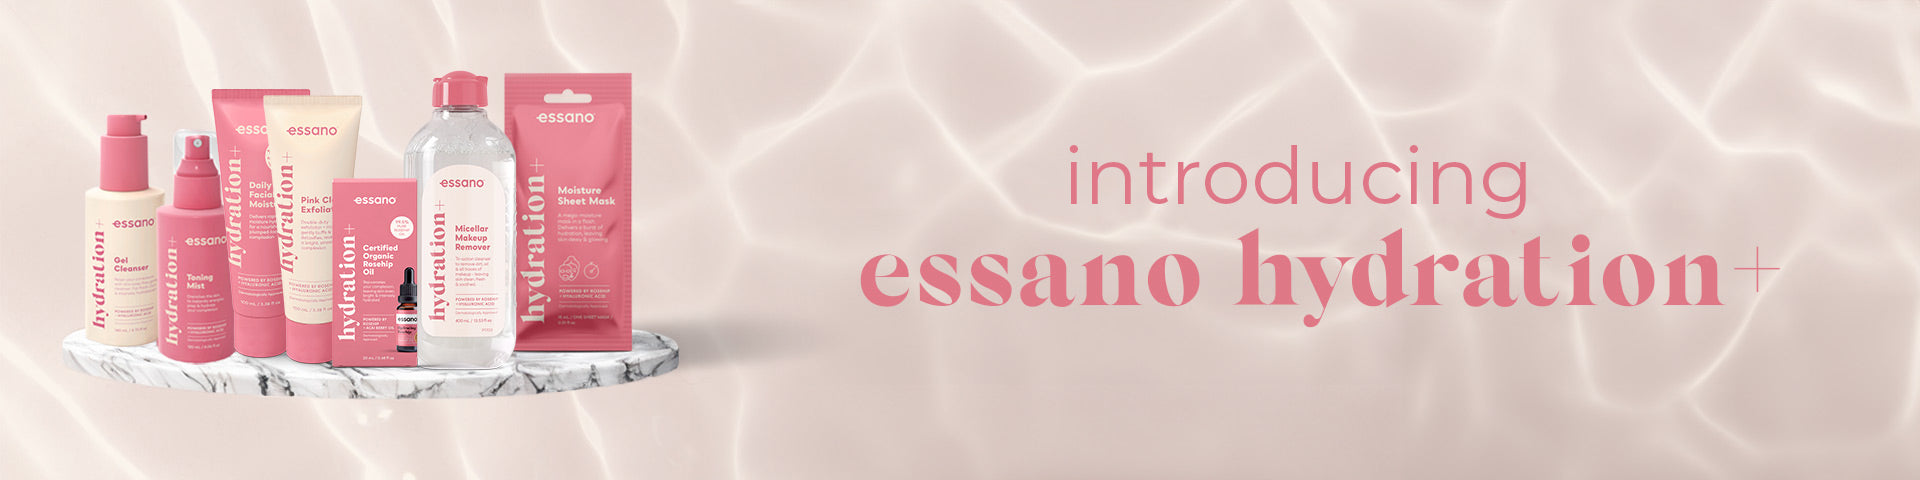 No More Thirsty Skin with essano Hydration+